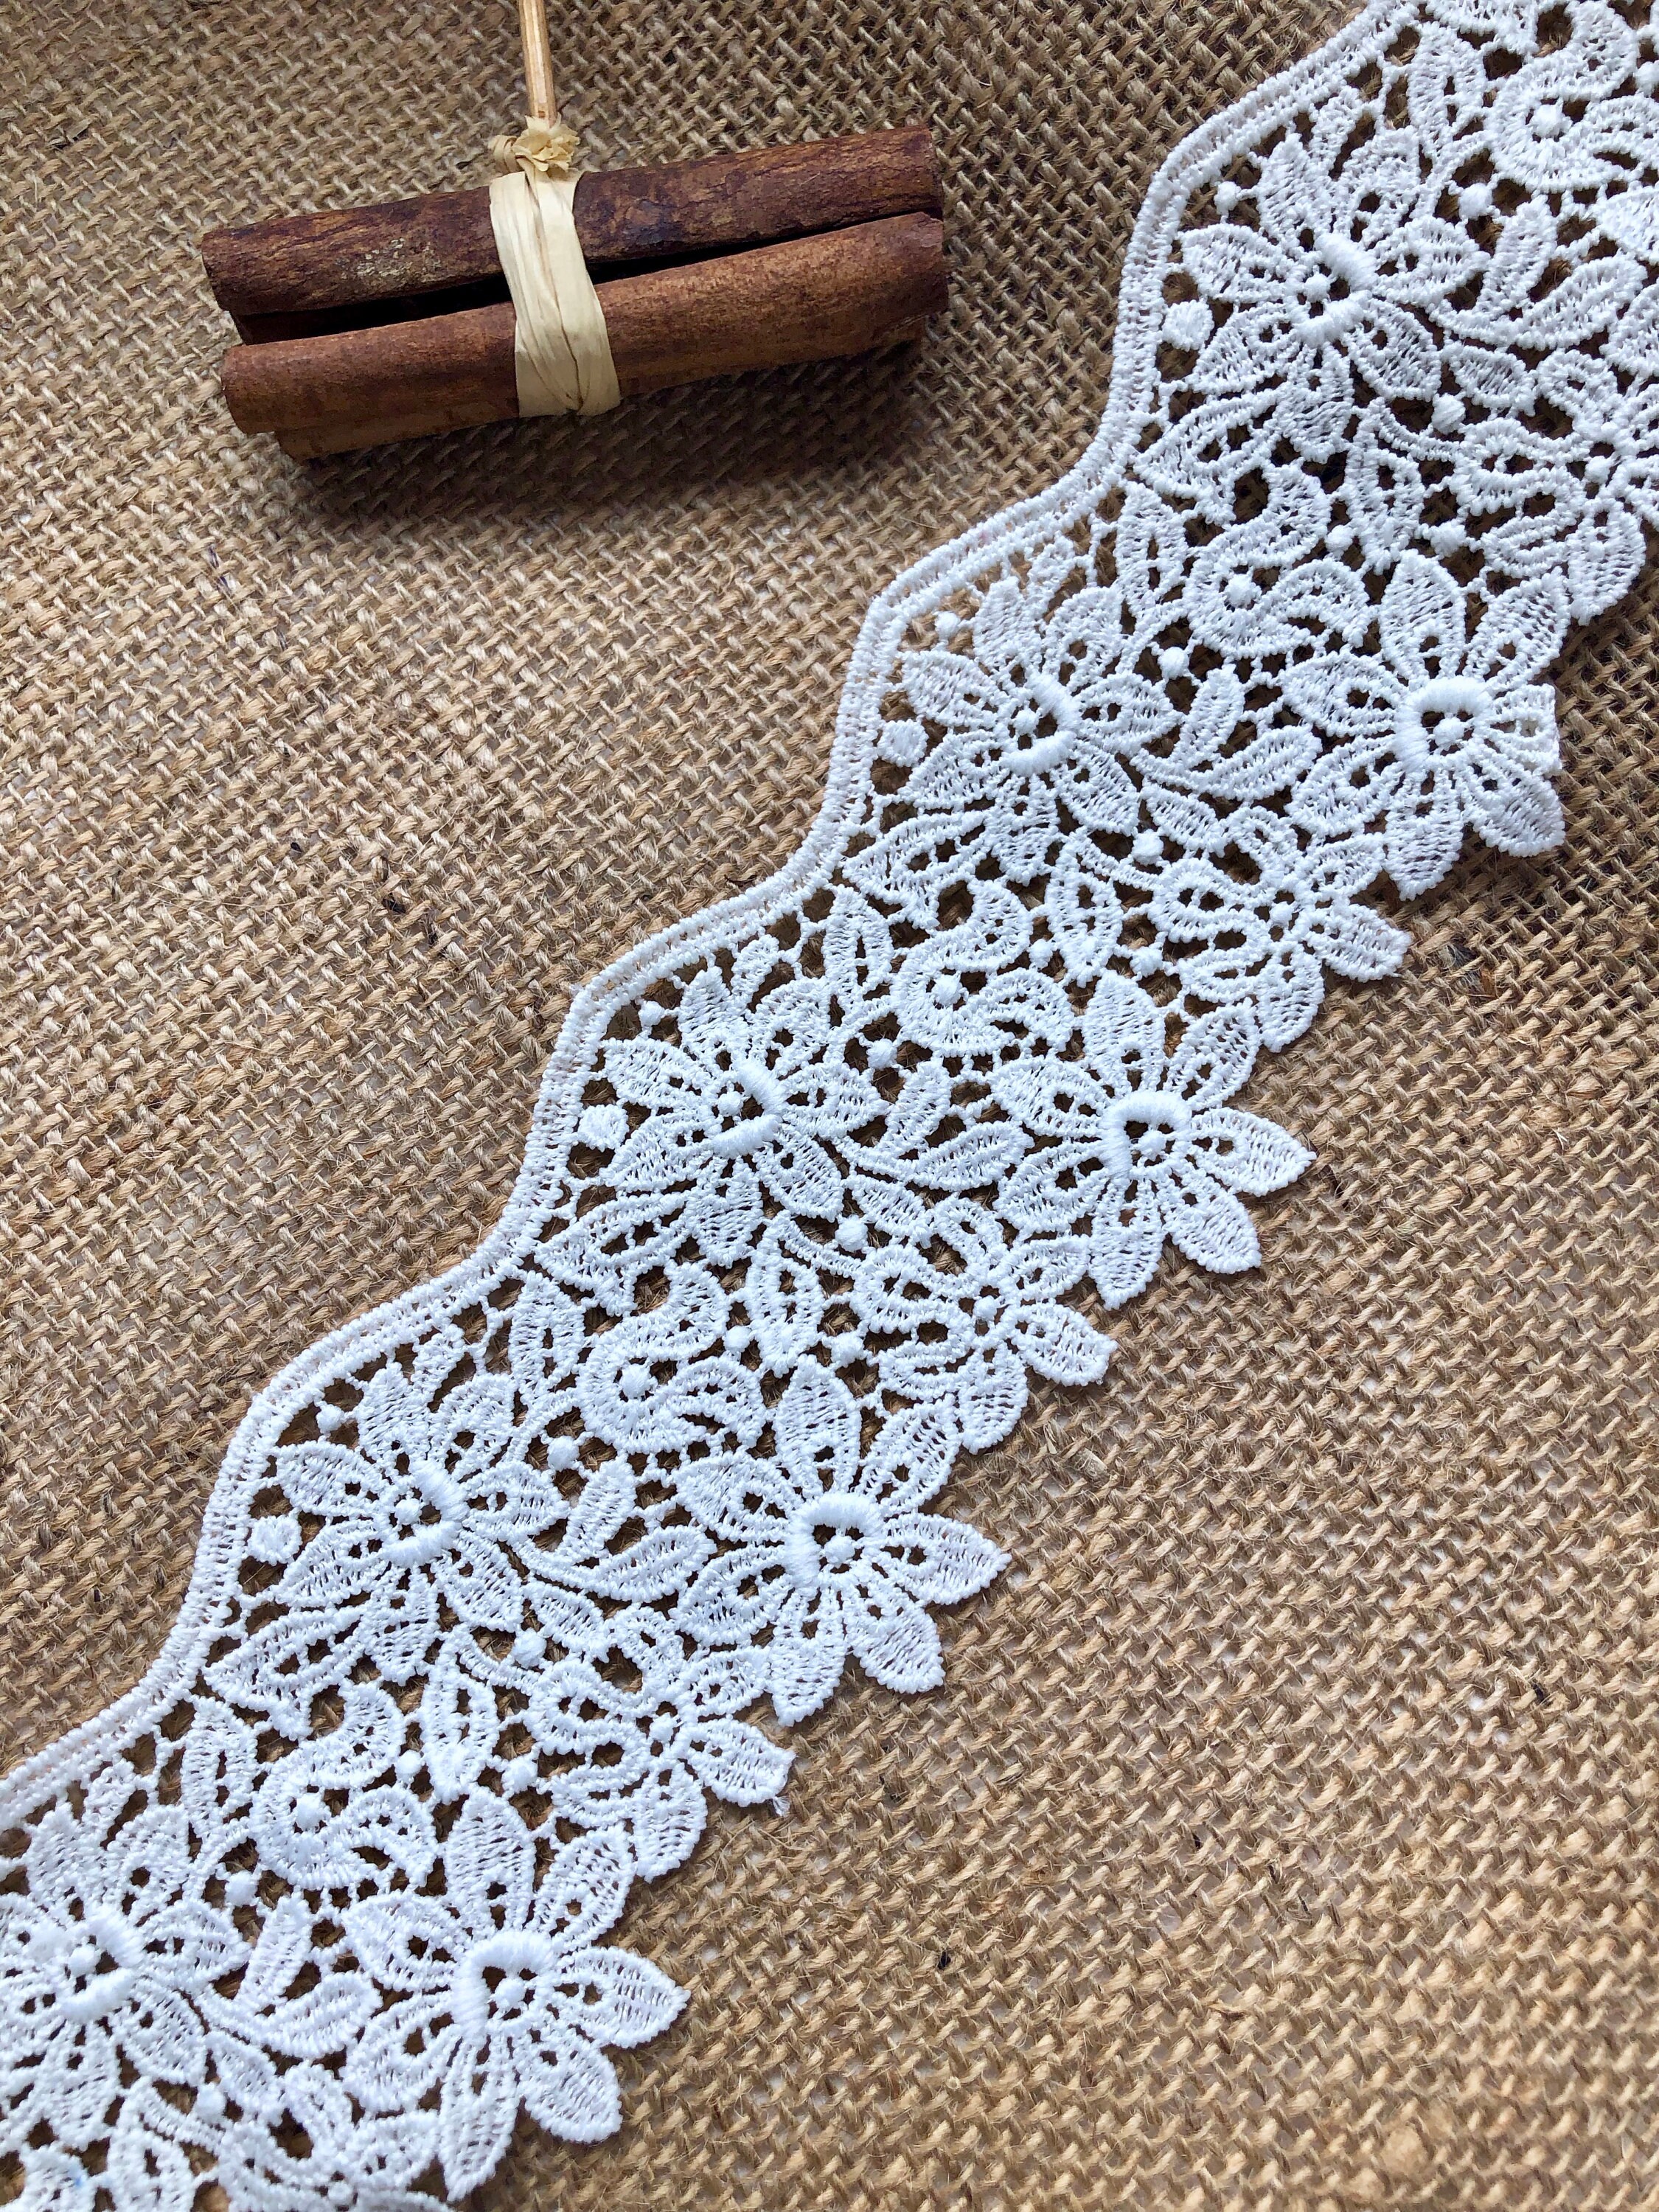 The Lace Co. Beautiful White or Ivory 3 Cut-Out Guipure/Venise Lace Trim